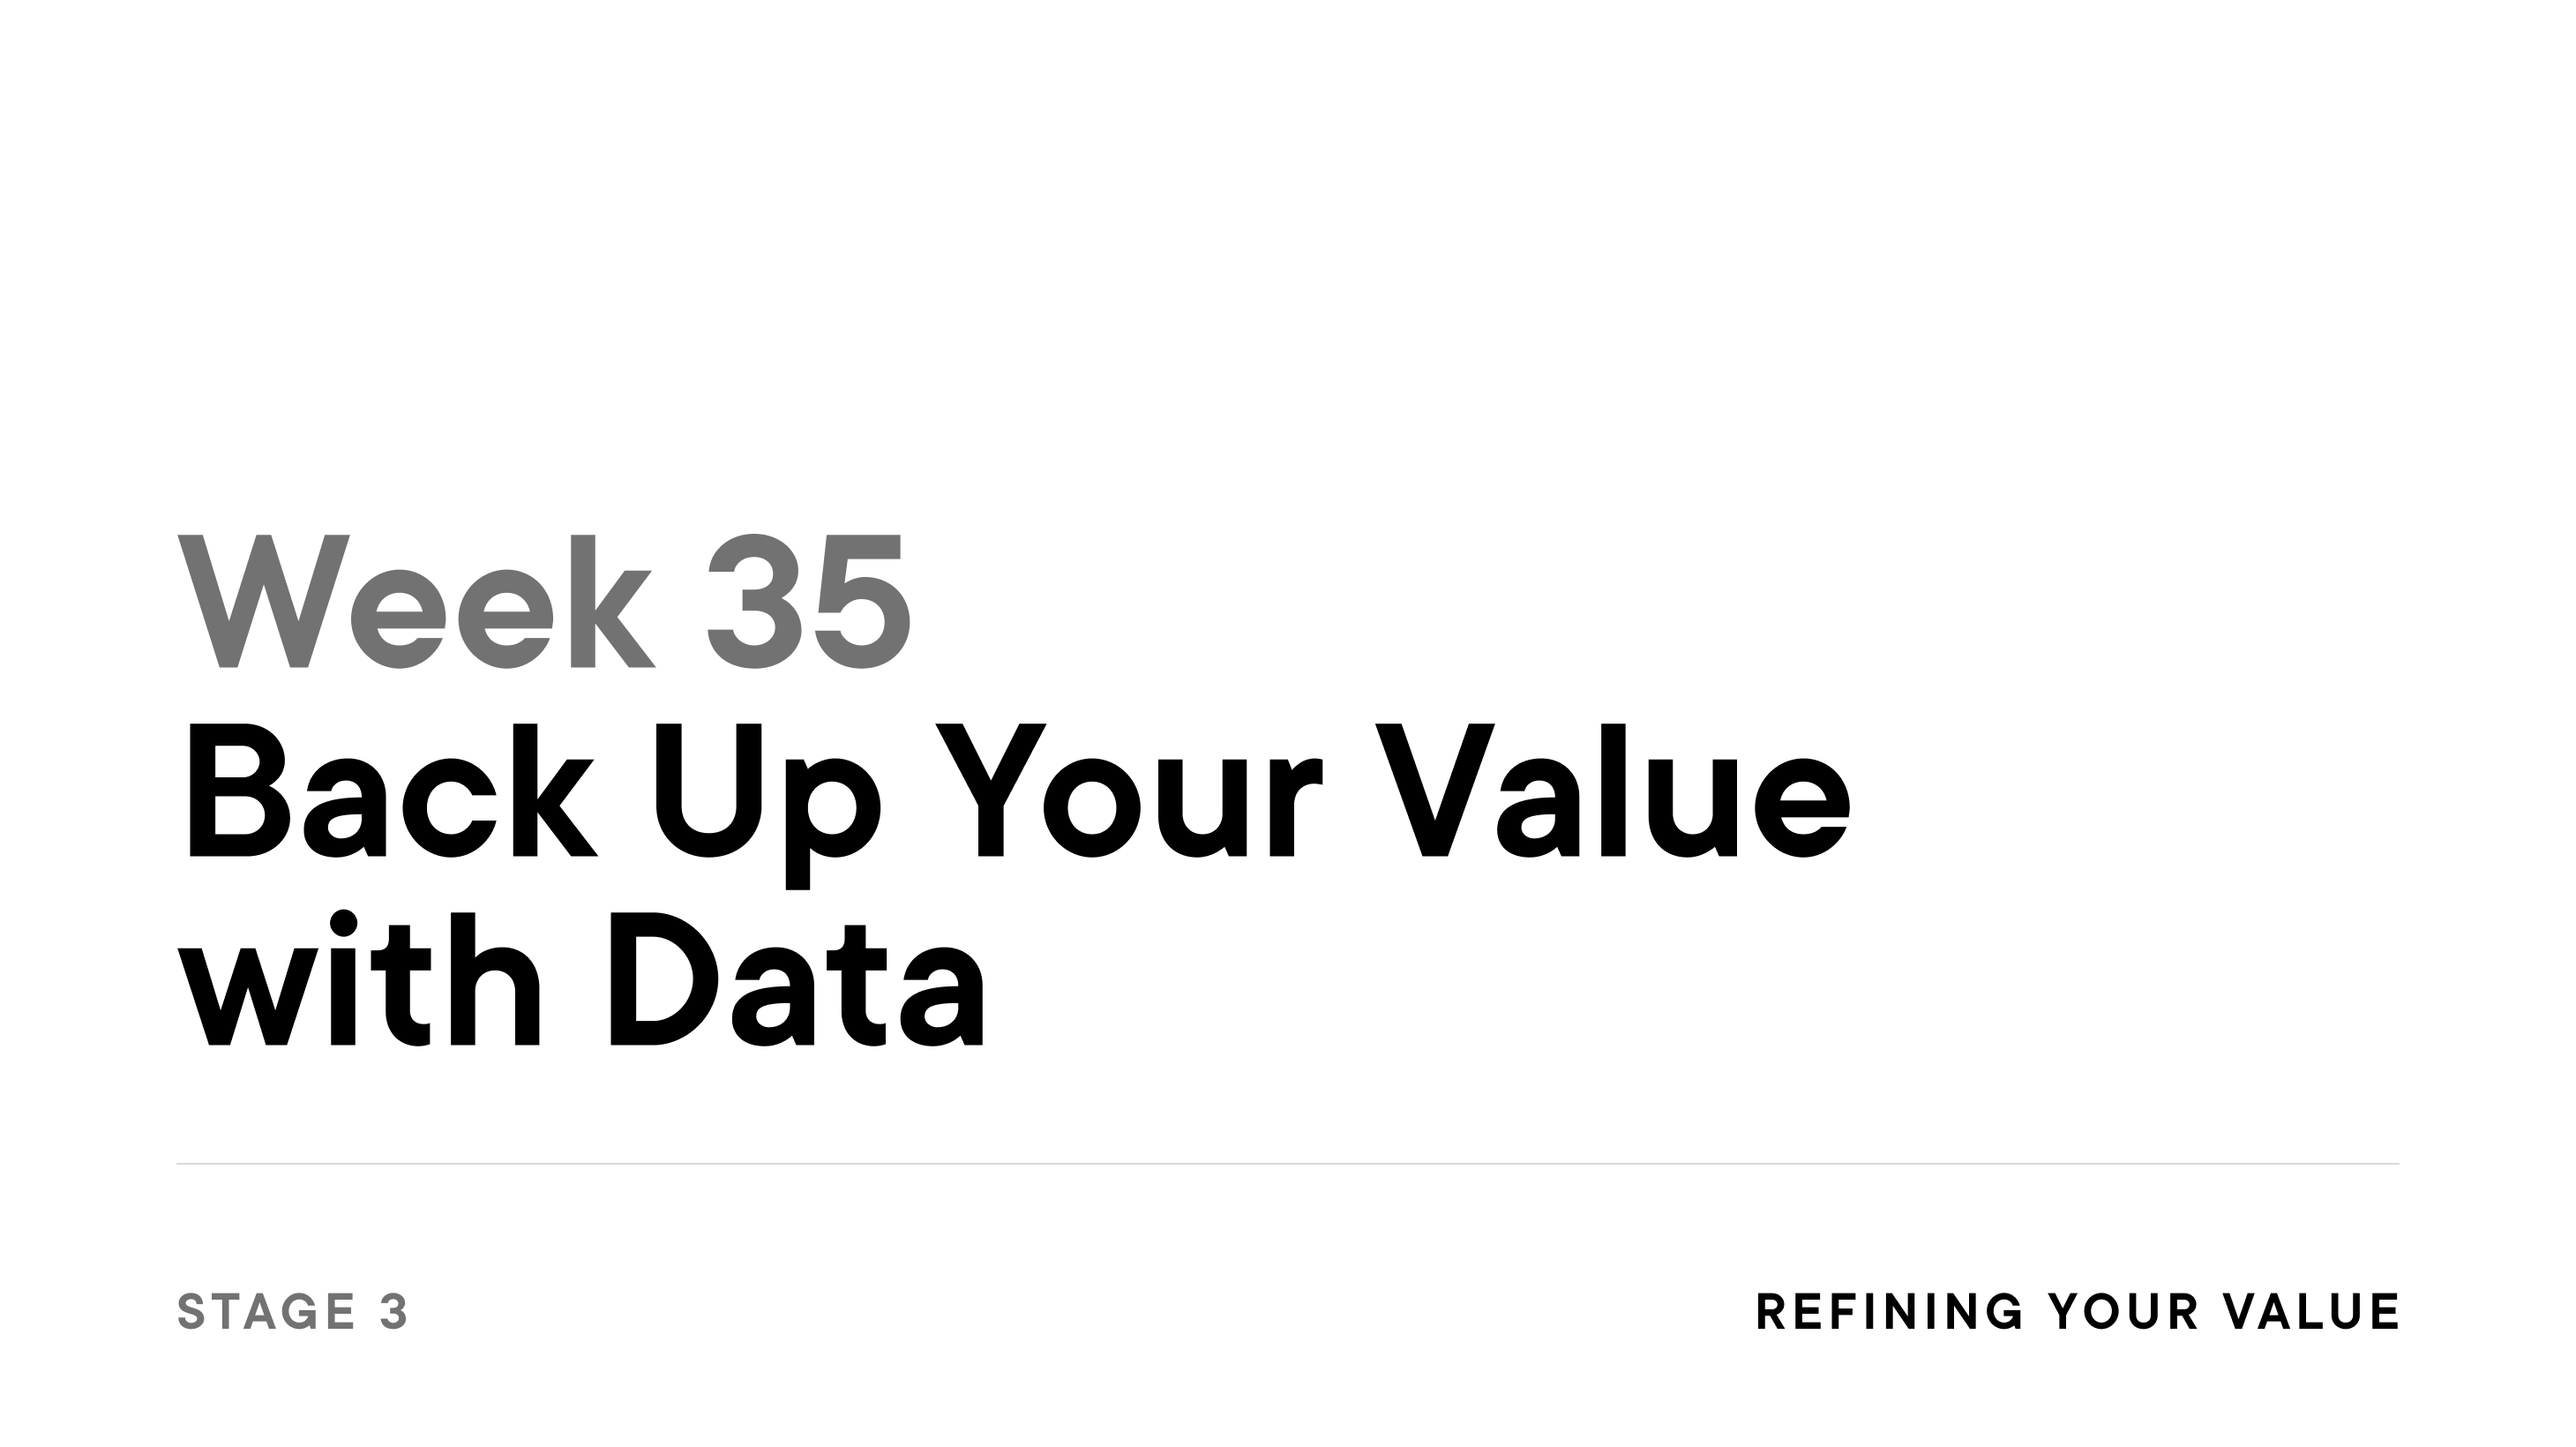 Week 35: Back Up Your Value with Data